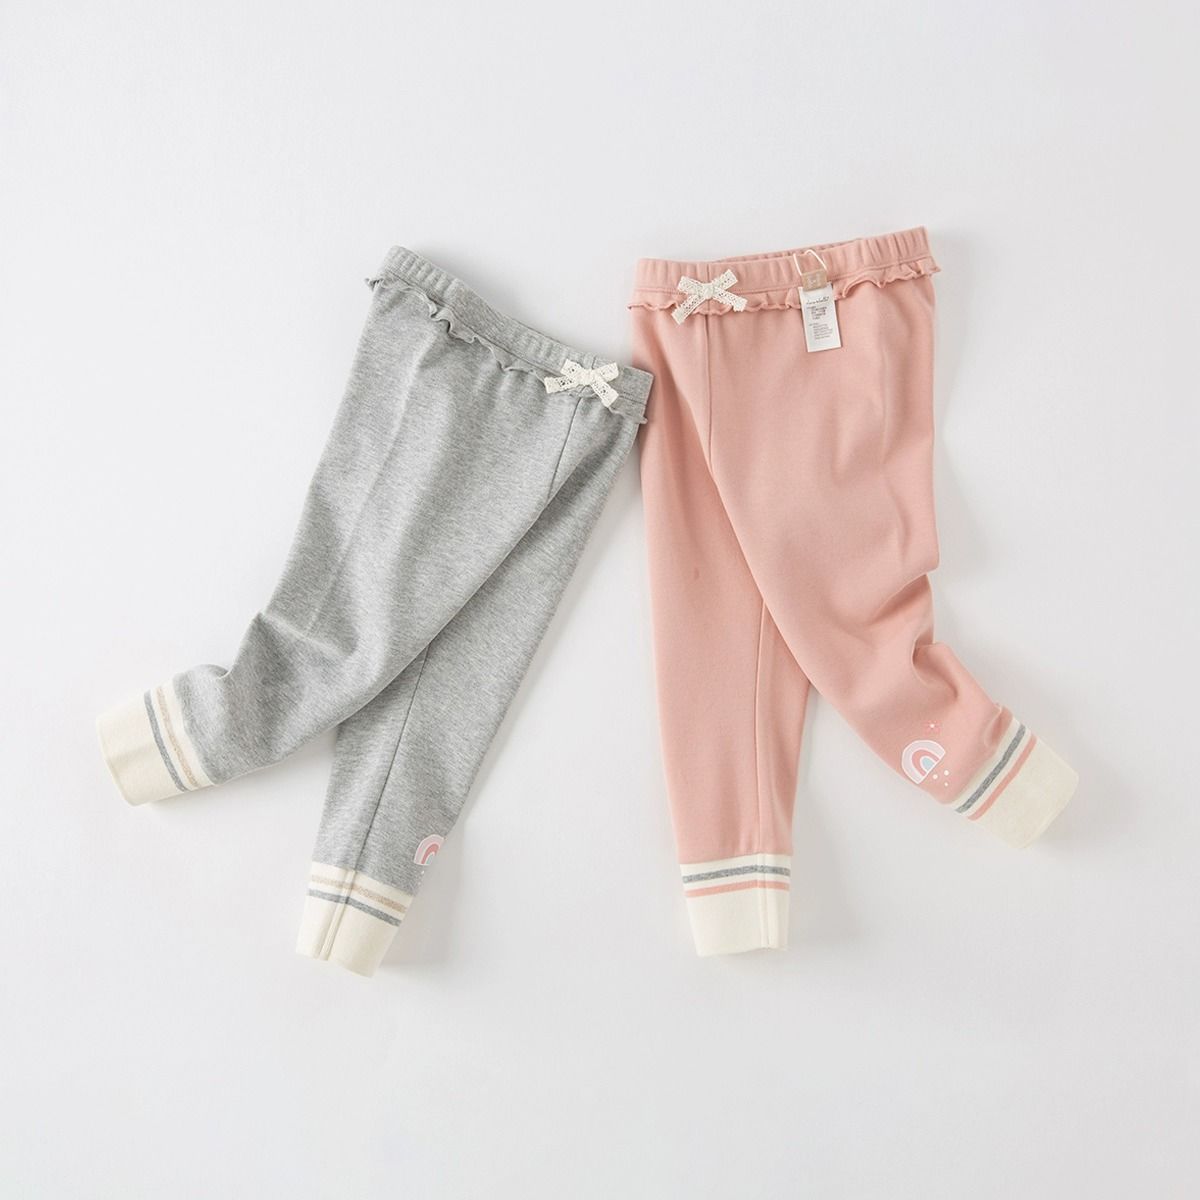 Girls' leggings 2023 spring and autumn style baby girl pants pure cotton casual pants girls fashionable children's pants for outer wear